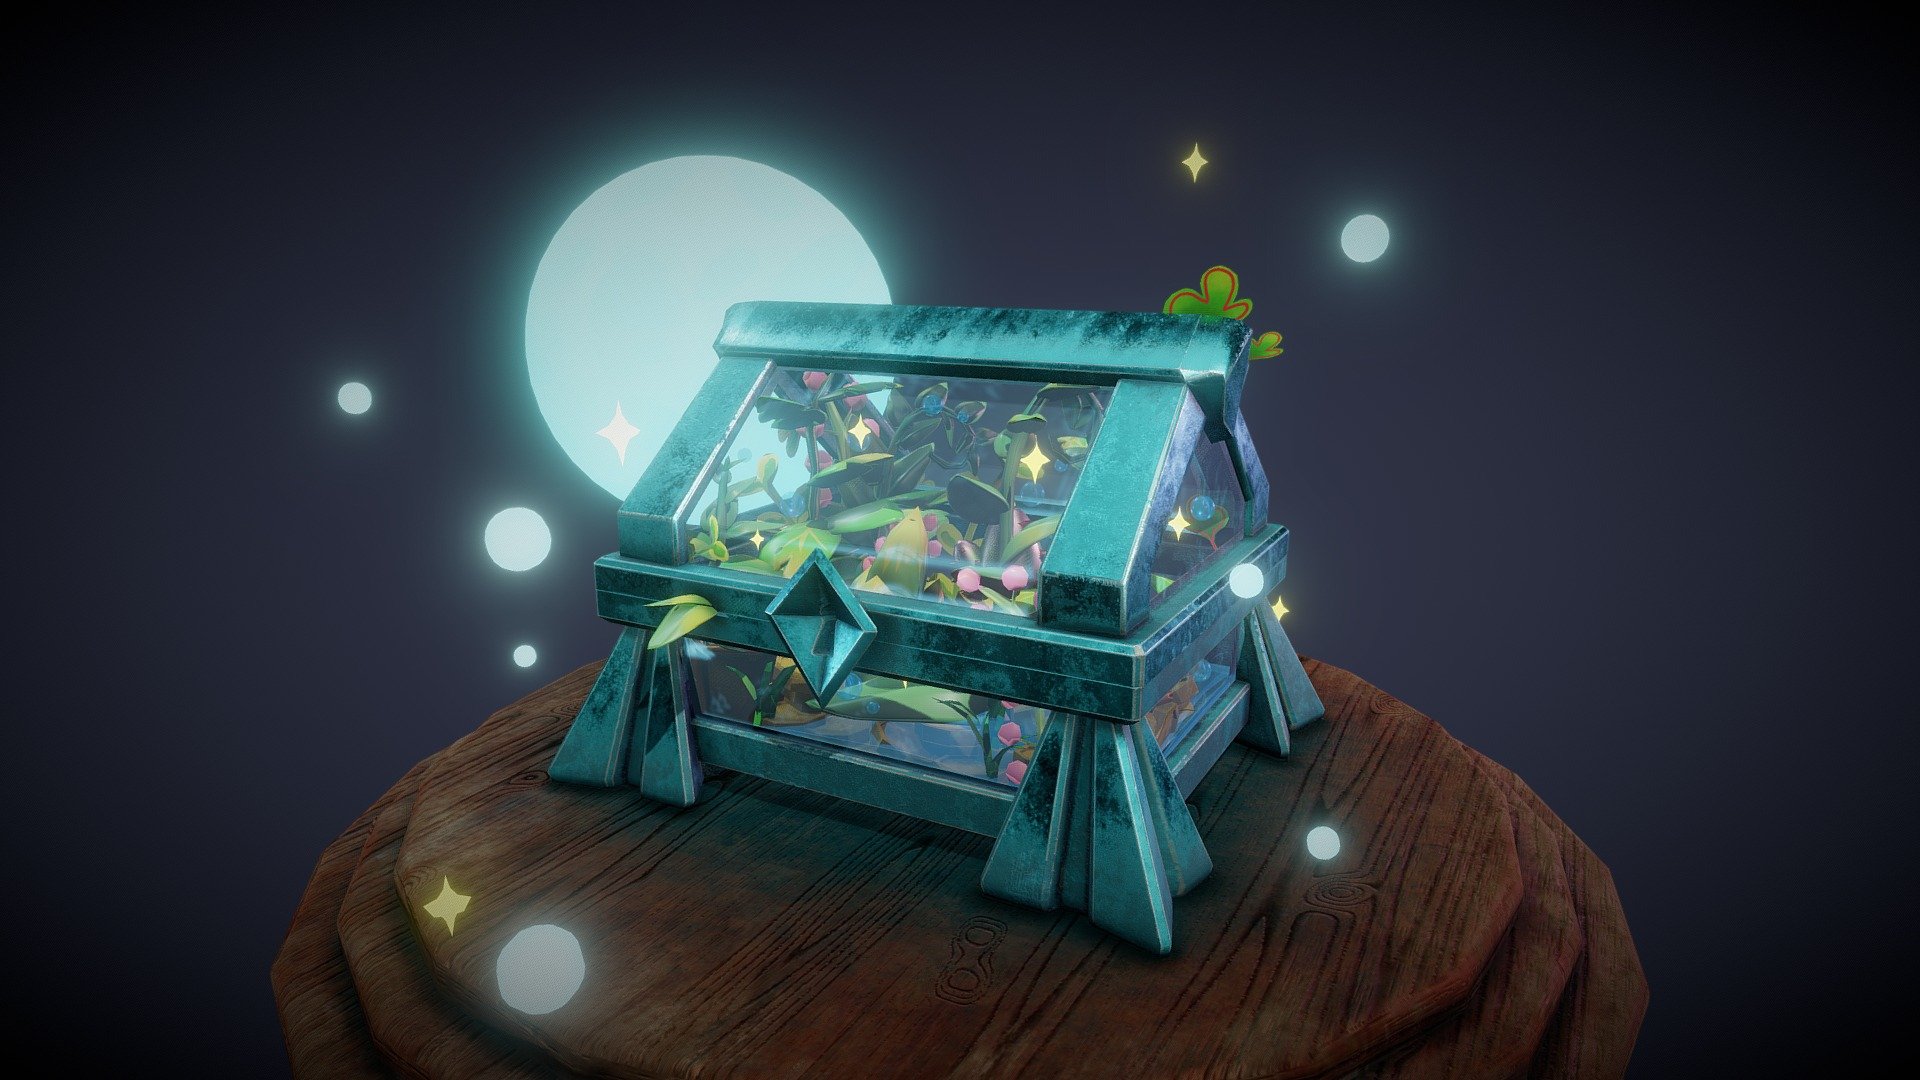 Just a glass treasure chest under the moonlight uwu - Night treasure chest - 3D model by sleepylina 3d model